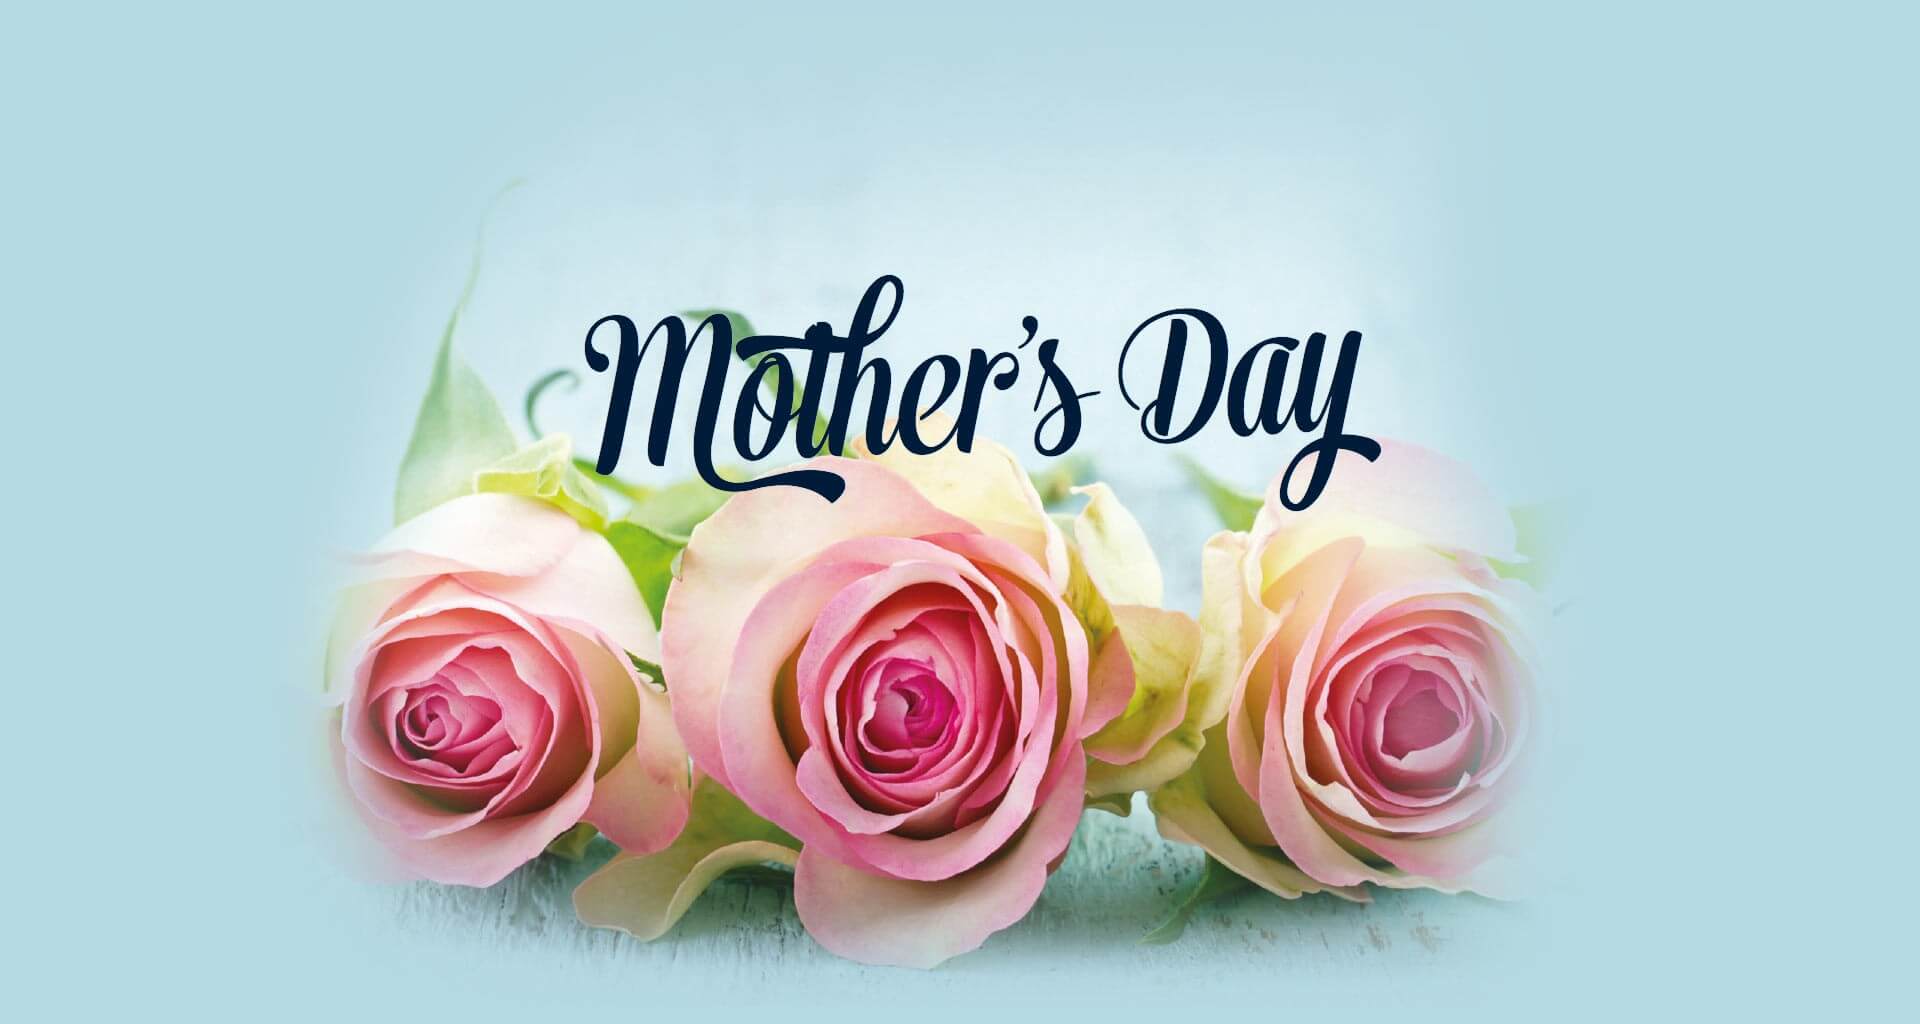 Happy Mothers Day HD Images Quotes and Wallpapers for Free Download  Online Send Mothers Day 2019 Wishes With GIF Greetings  WhatsApp Sticker  Messages   LatestLY